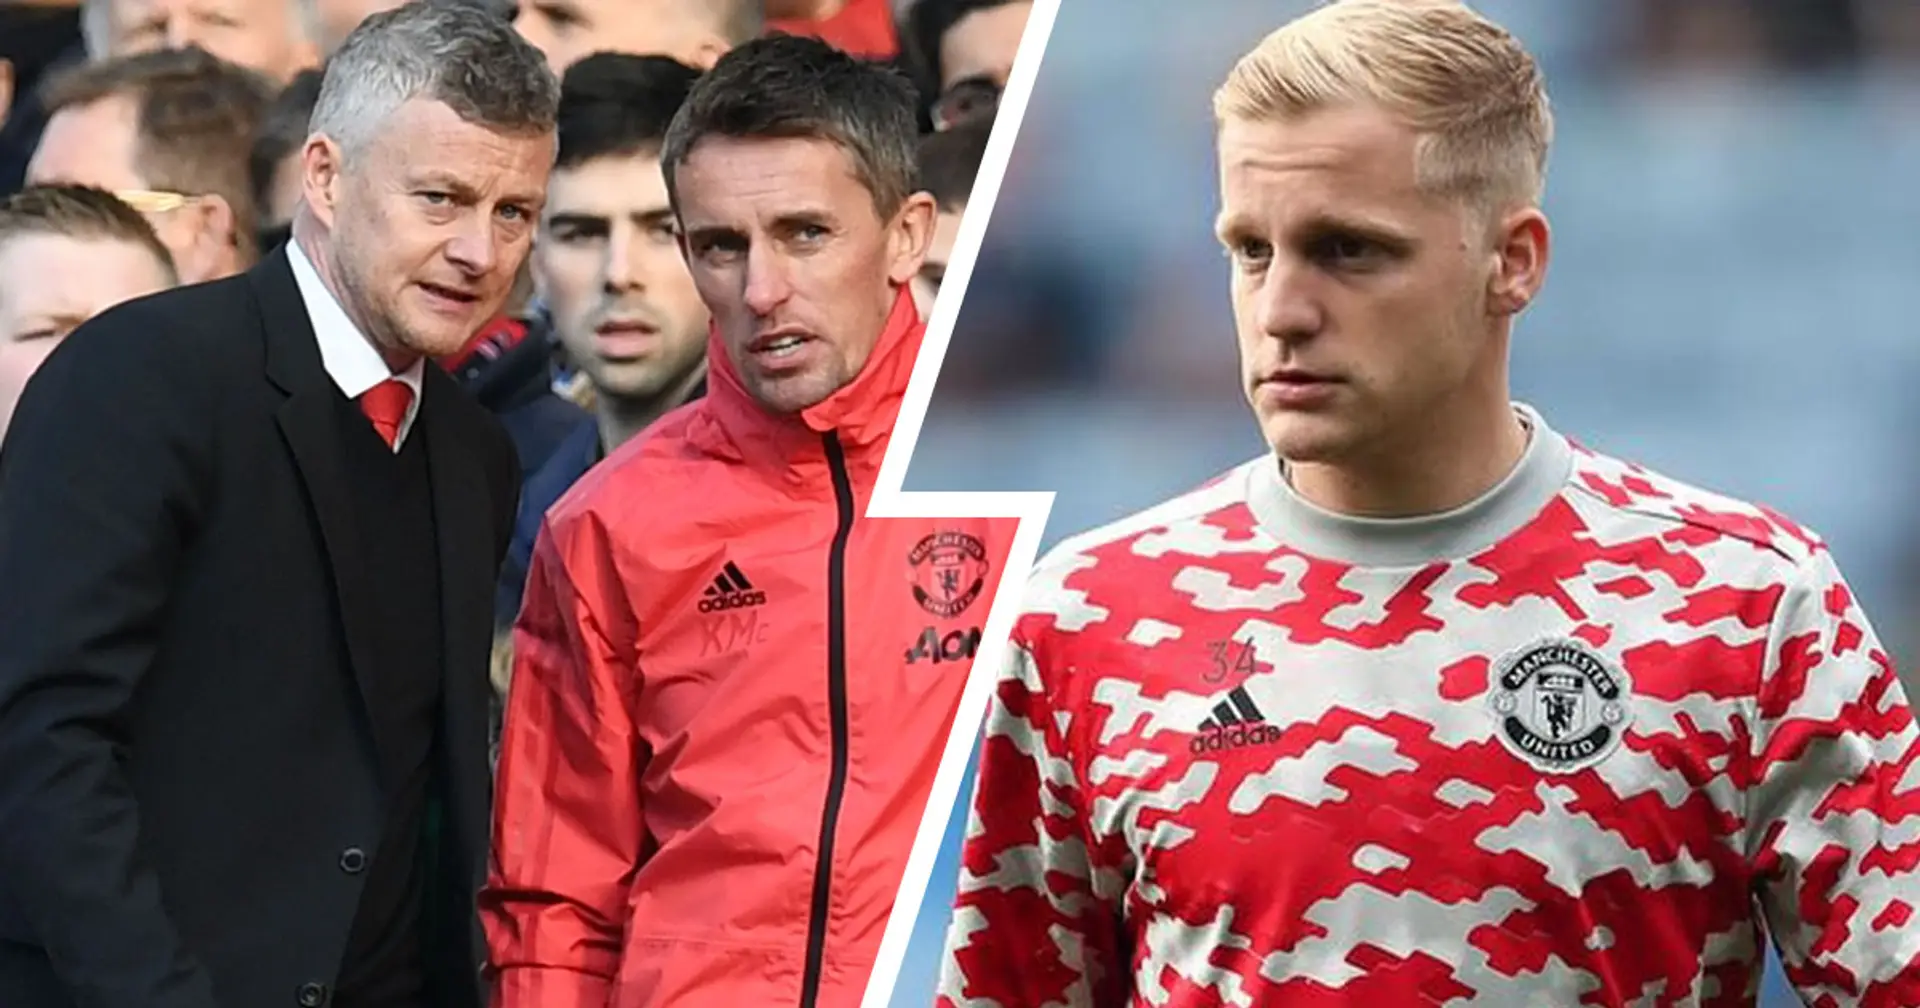 Solskjaer's staff felt Van de Beek 'didn't have the right personality' to succeed at United